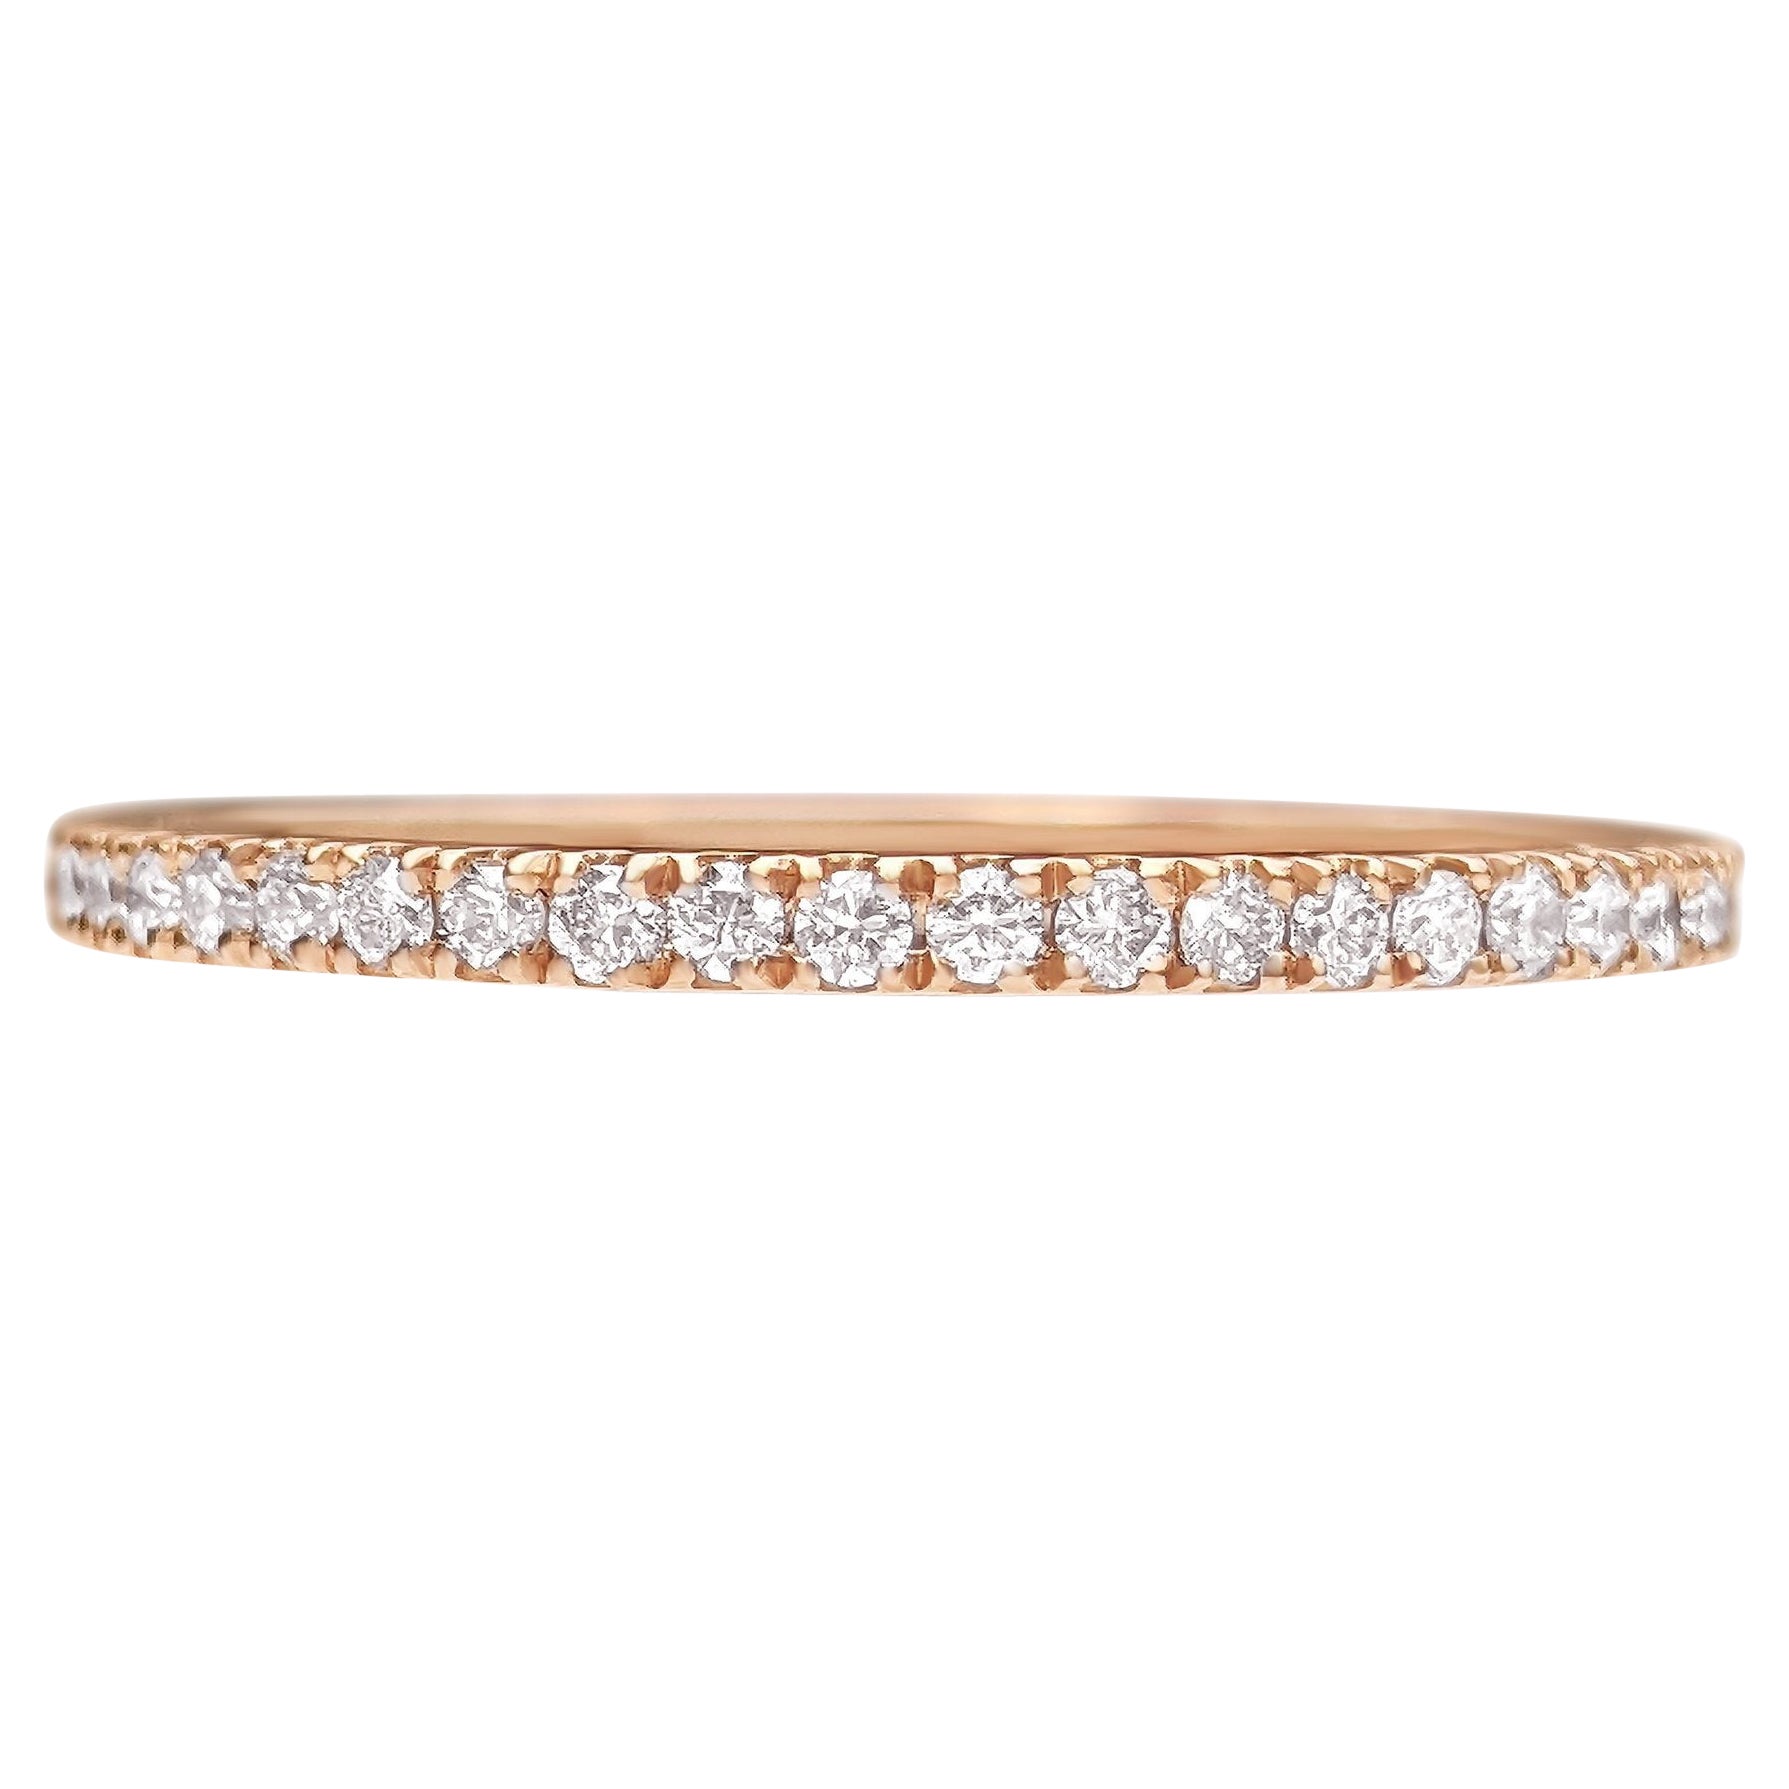 NO RESERVE! 0.33Ct Fancy Pink Diamonds Eternity Band - 14kt Rose gold - Ring For Sale